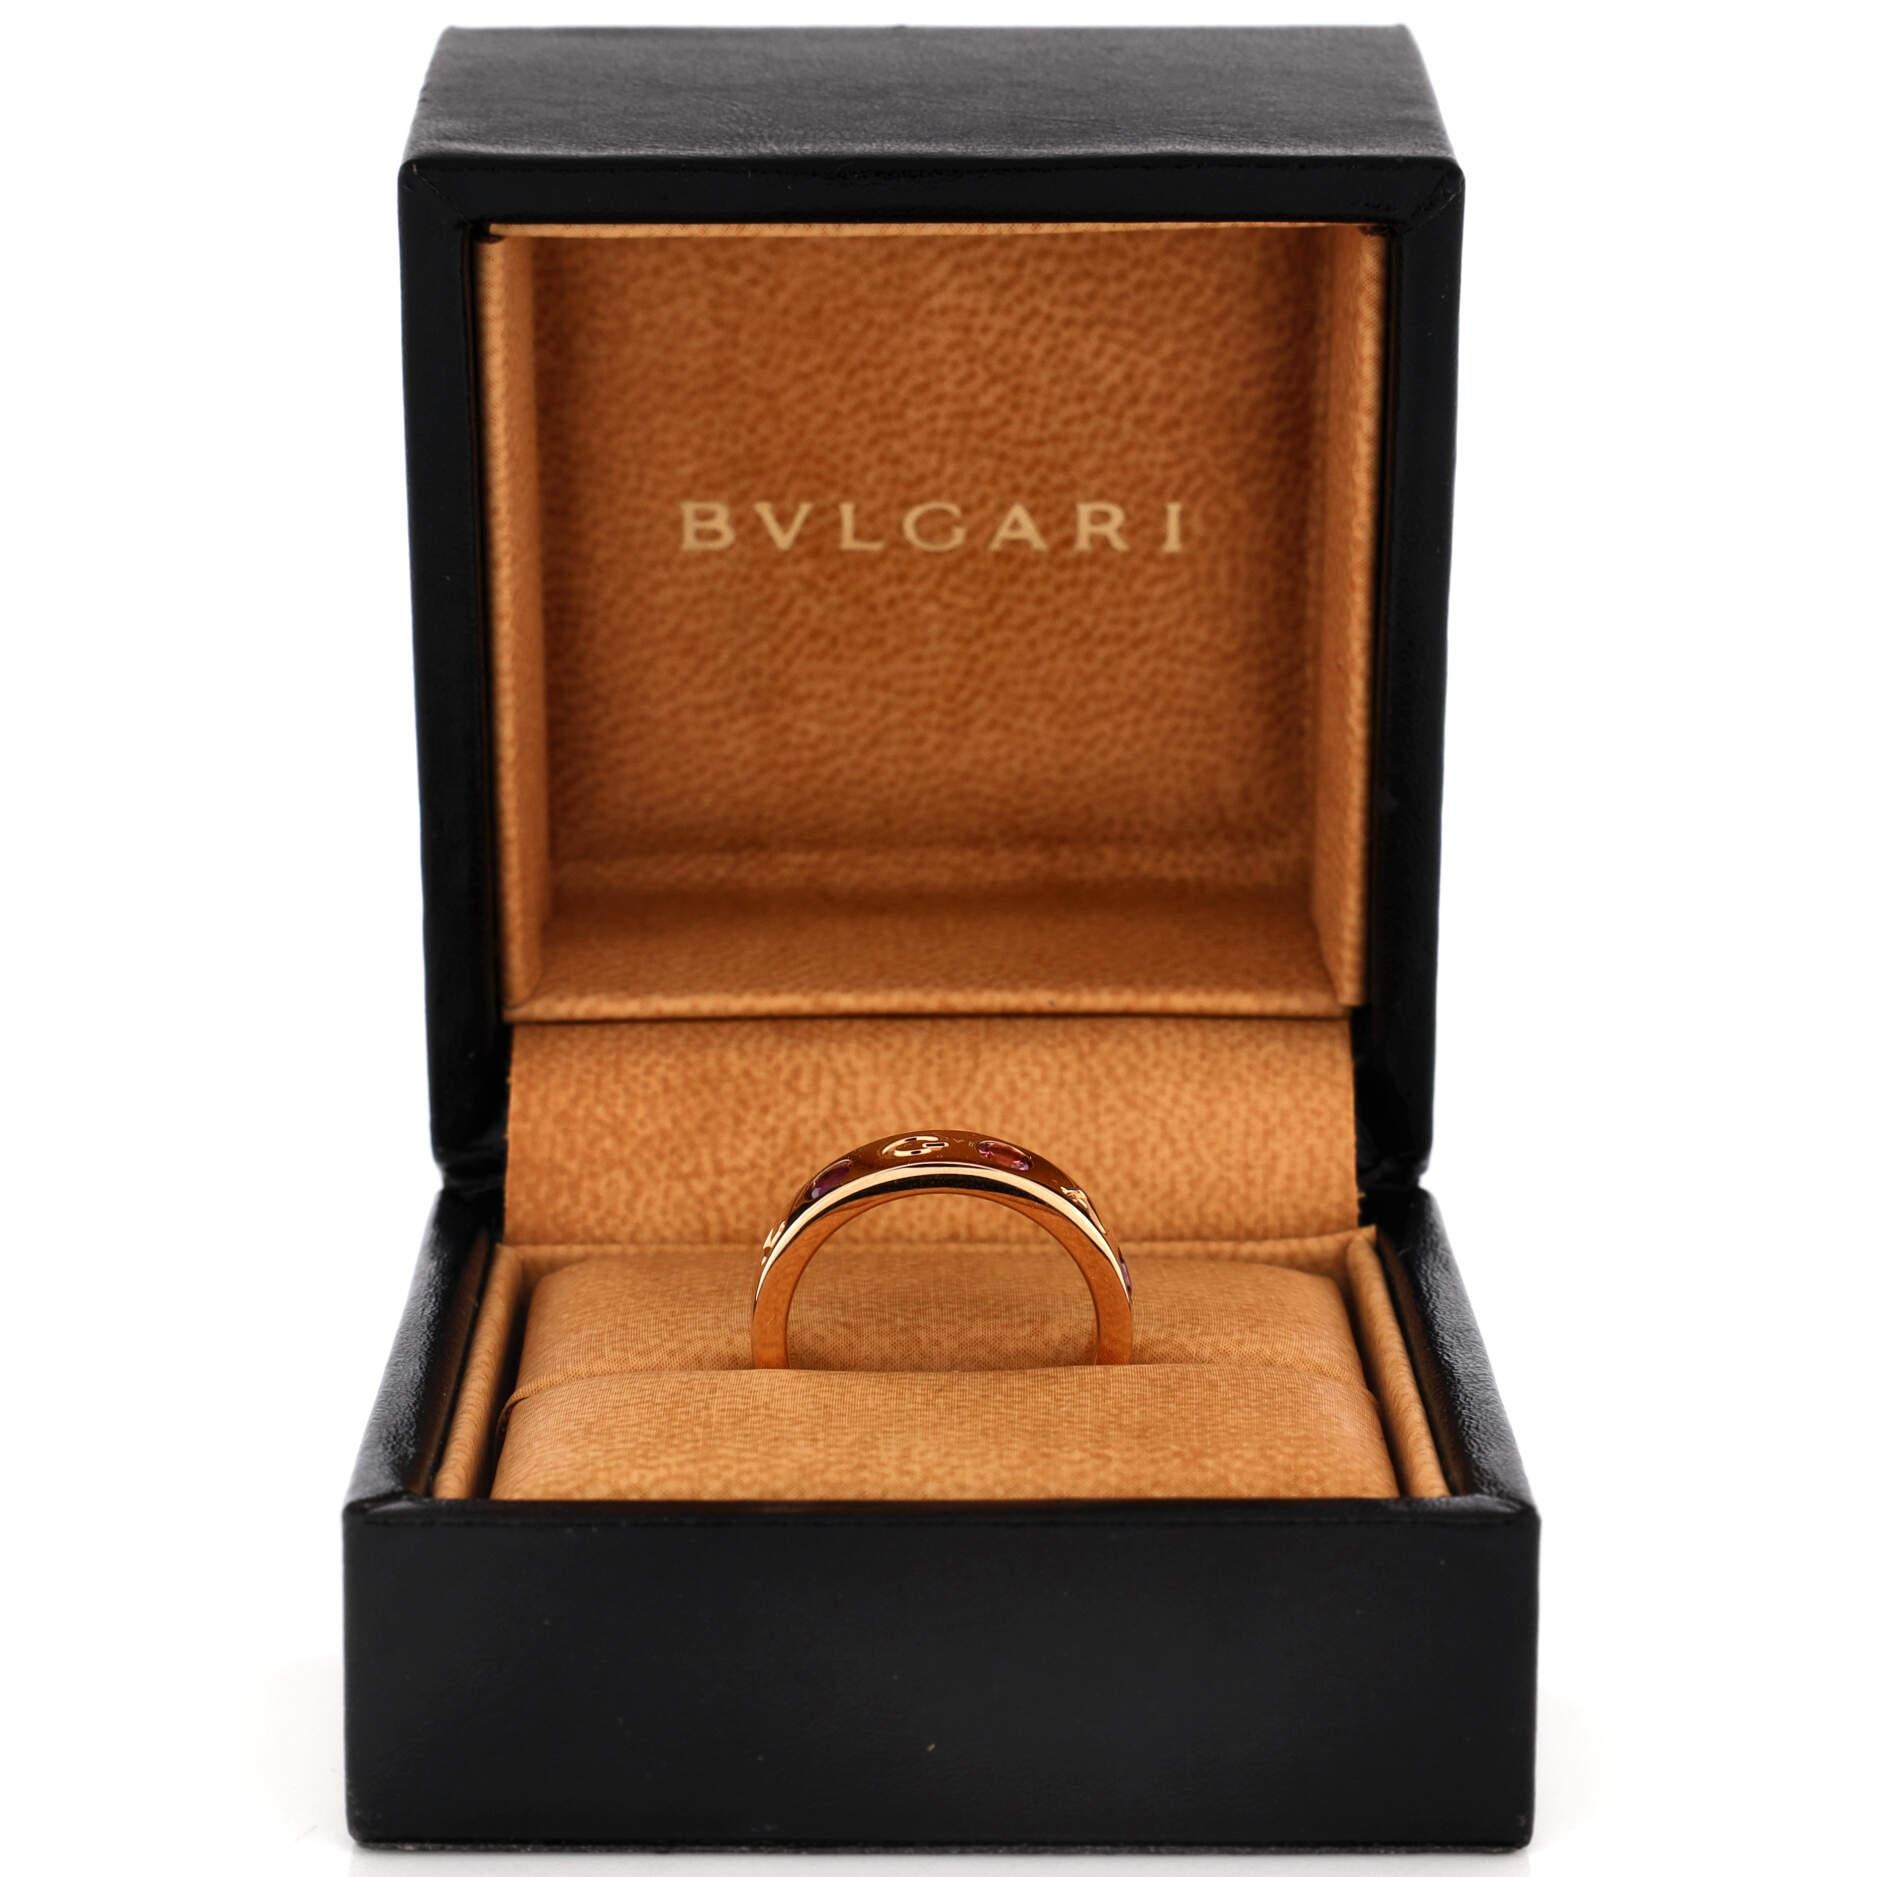 Condition: Great. Minor wear throughout.
Accessories: No Accessories
Measurements: Size: 6 - 52, Width: 5.10 mm
Designer: Bvlgari
Model: Roman Sorbets Band Ring 18K Rose Gold with Amethysts and Tourmalines and Diamonds
Exterior Color: Rose Gold
Item